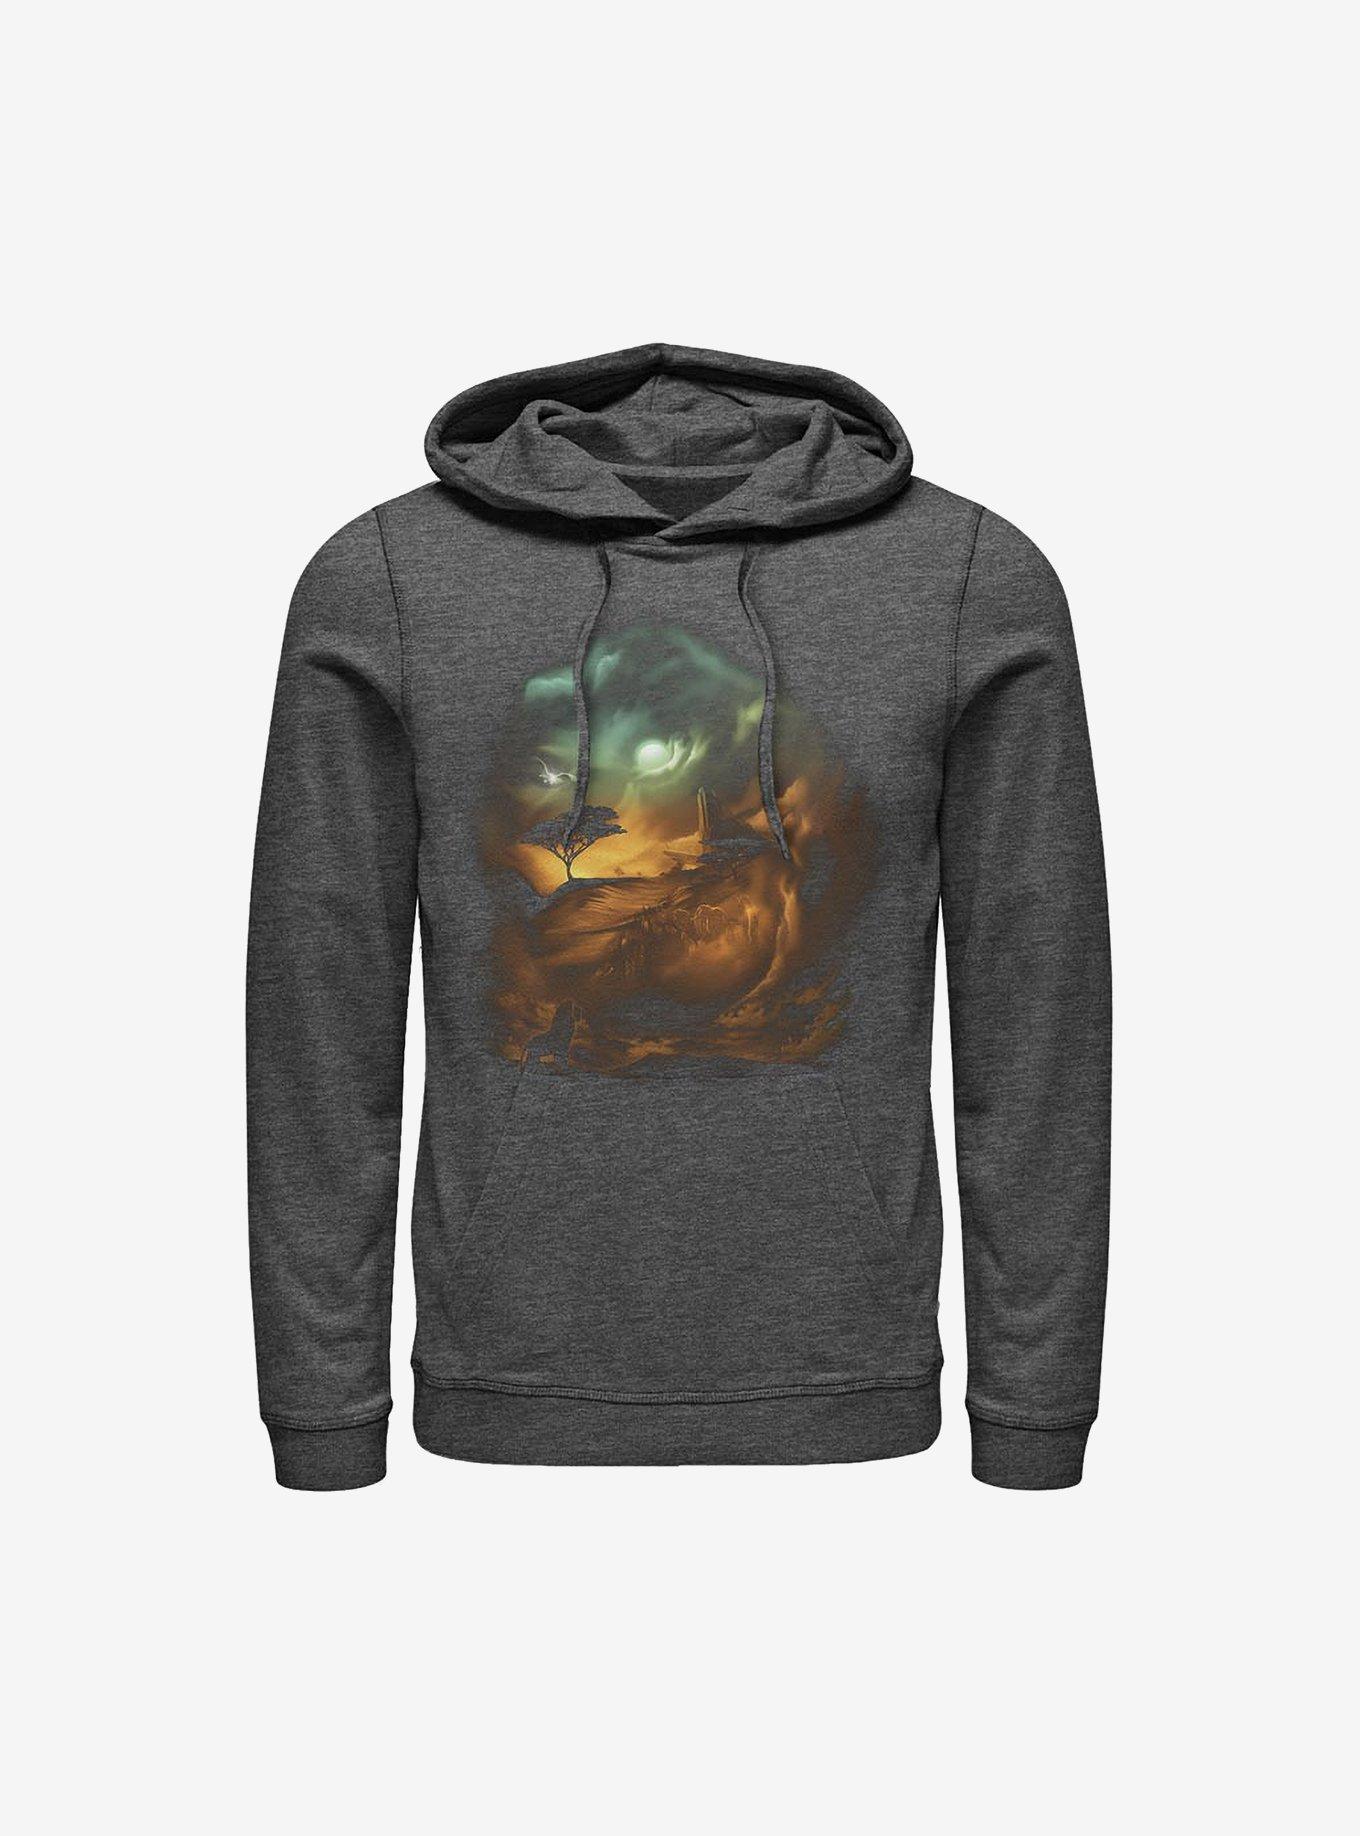 Disney The Lion King Birth Of A King Hoodie, CHAR HTR, hi-res